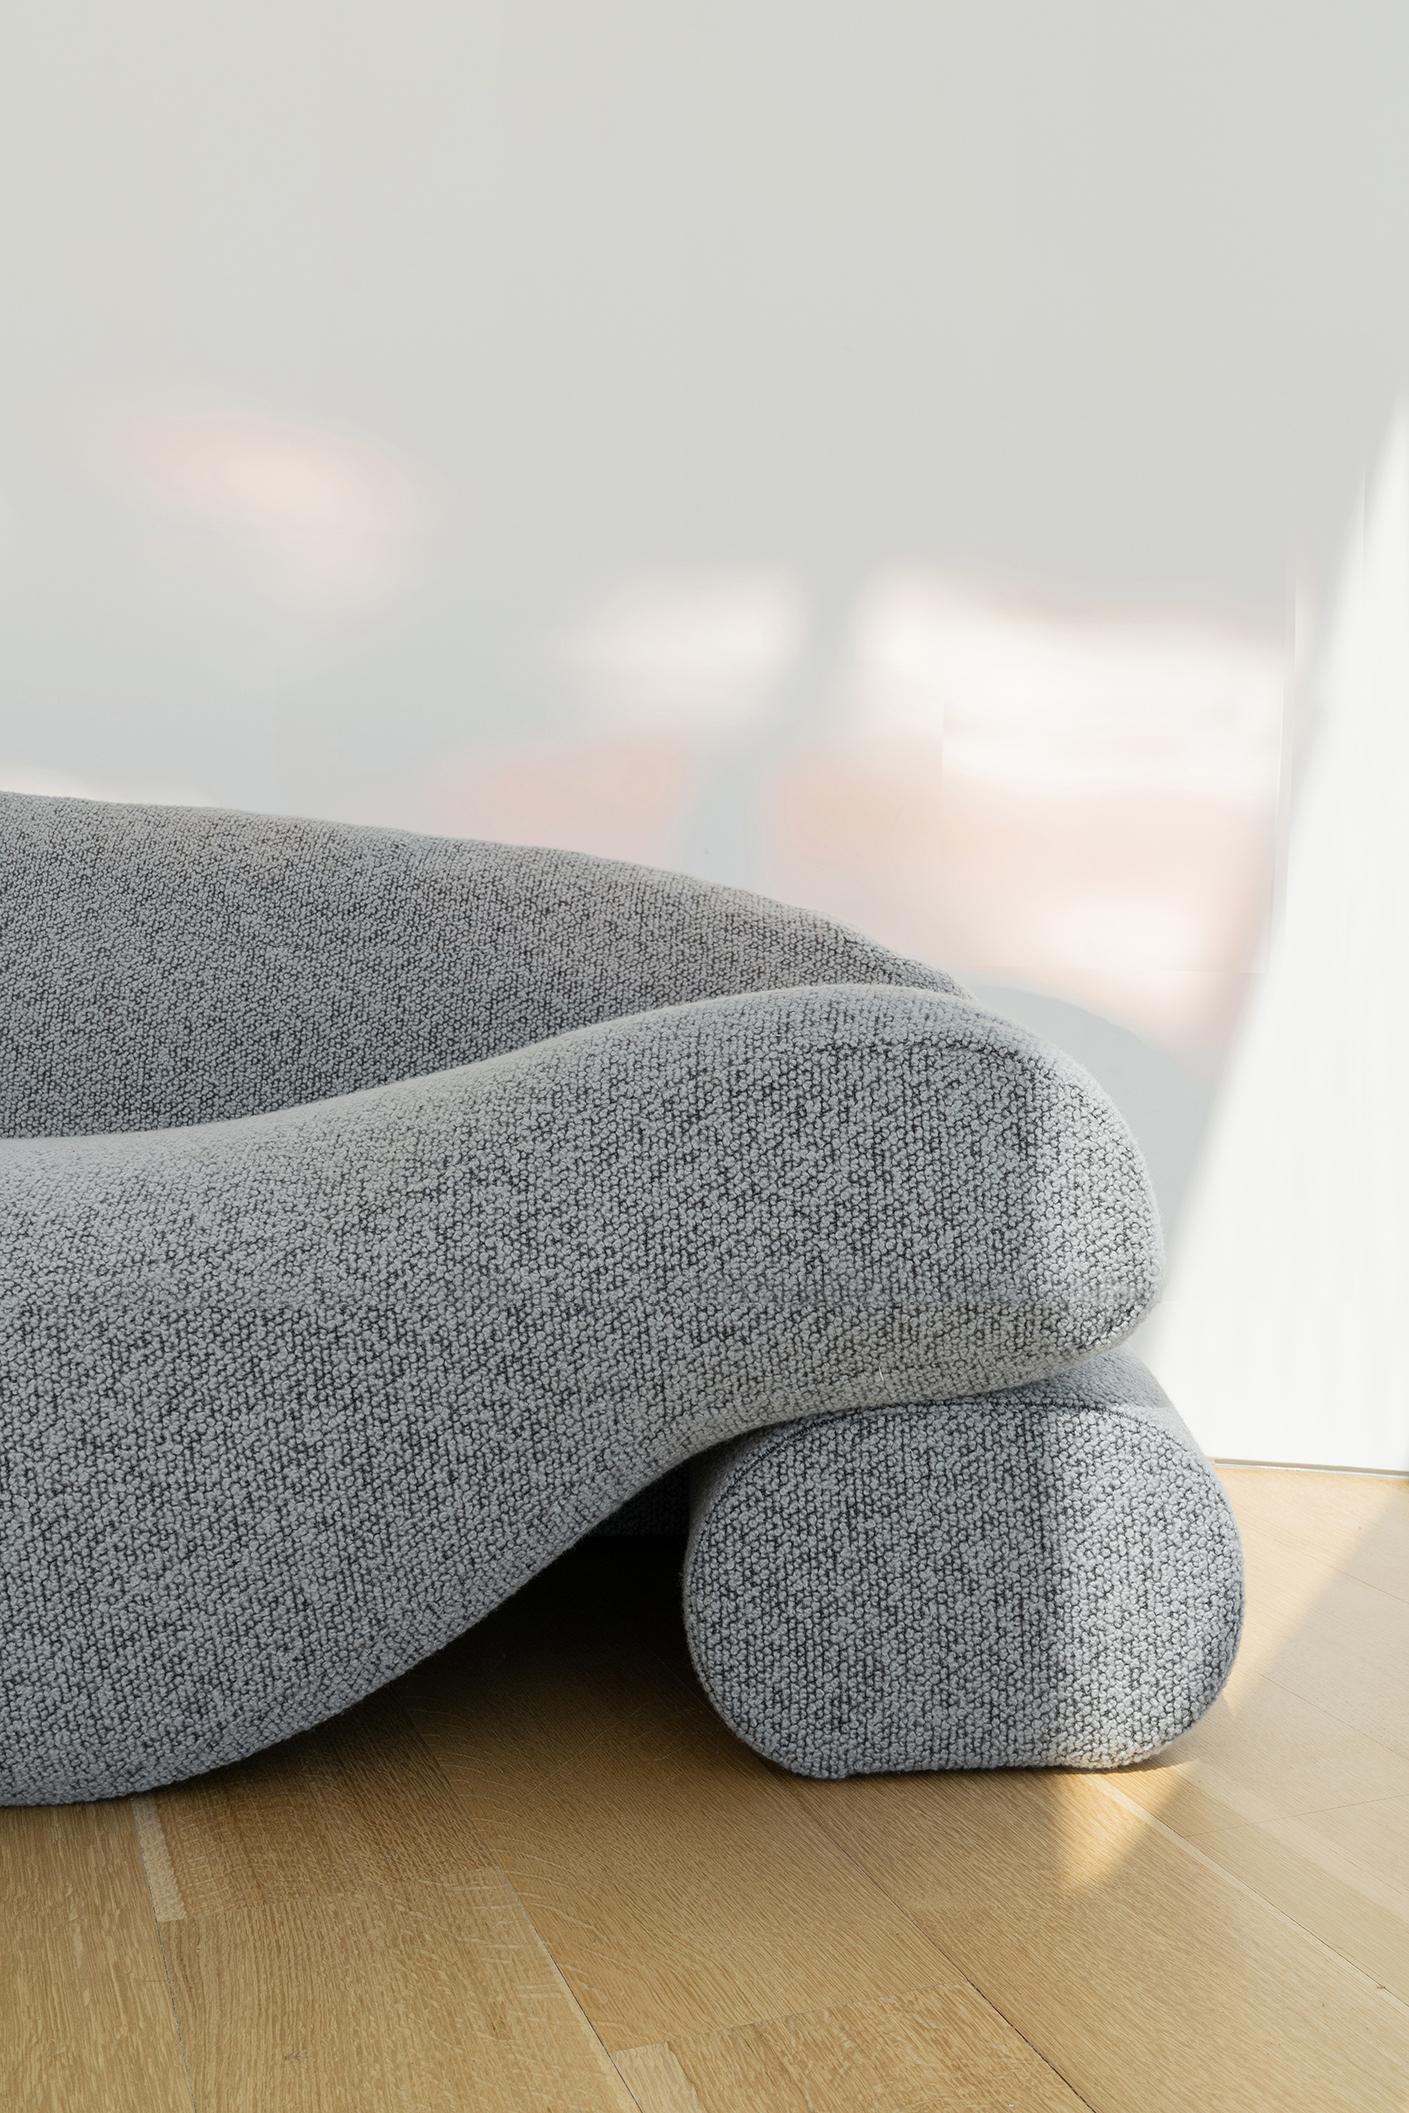 The Beanie Sofa is a comfortable textile covered sofa whose seat is comprised of one long bean bag. The sofa incorporates daybeds facing opposite directions. Its soft structure is filled with organic latex and lentil beans, which support the natural